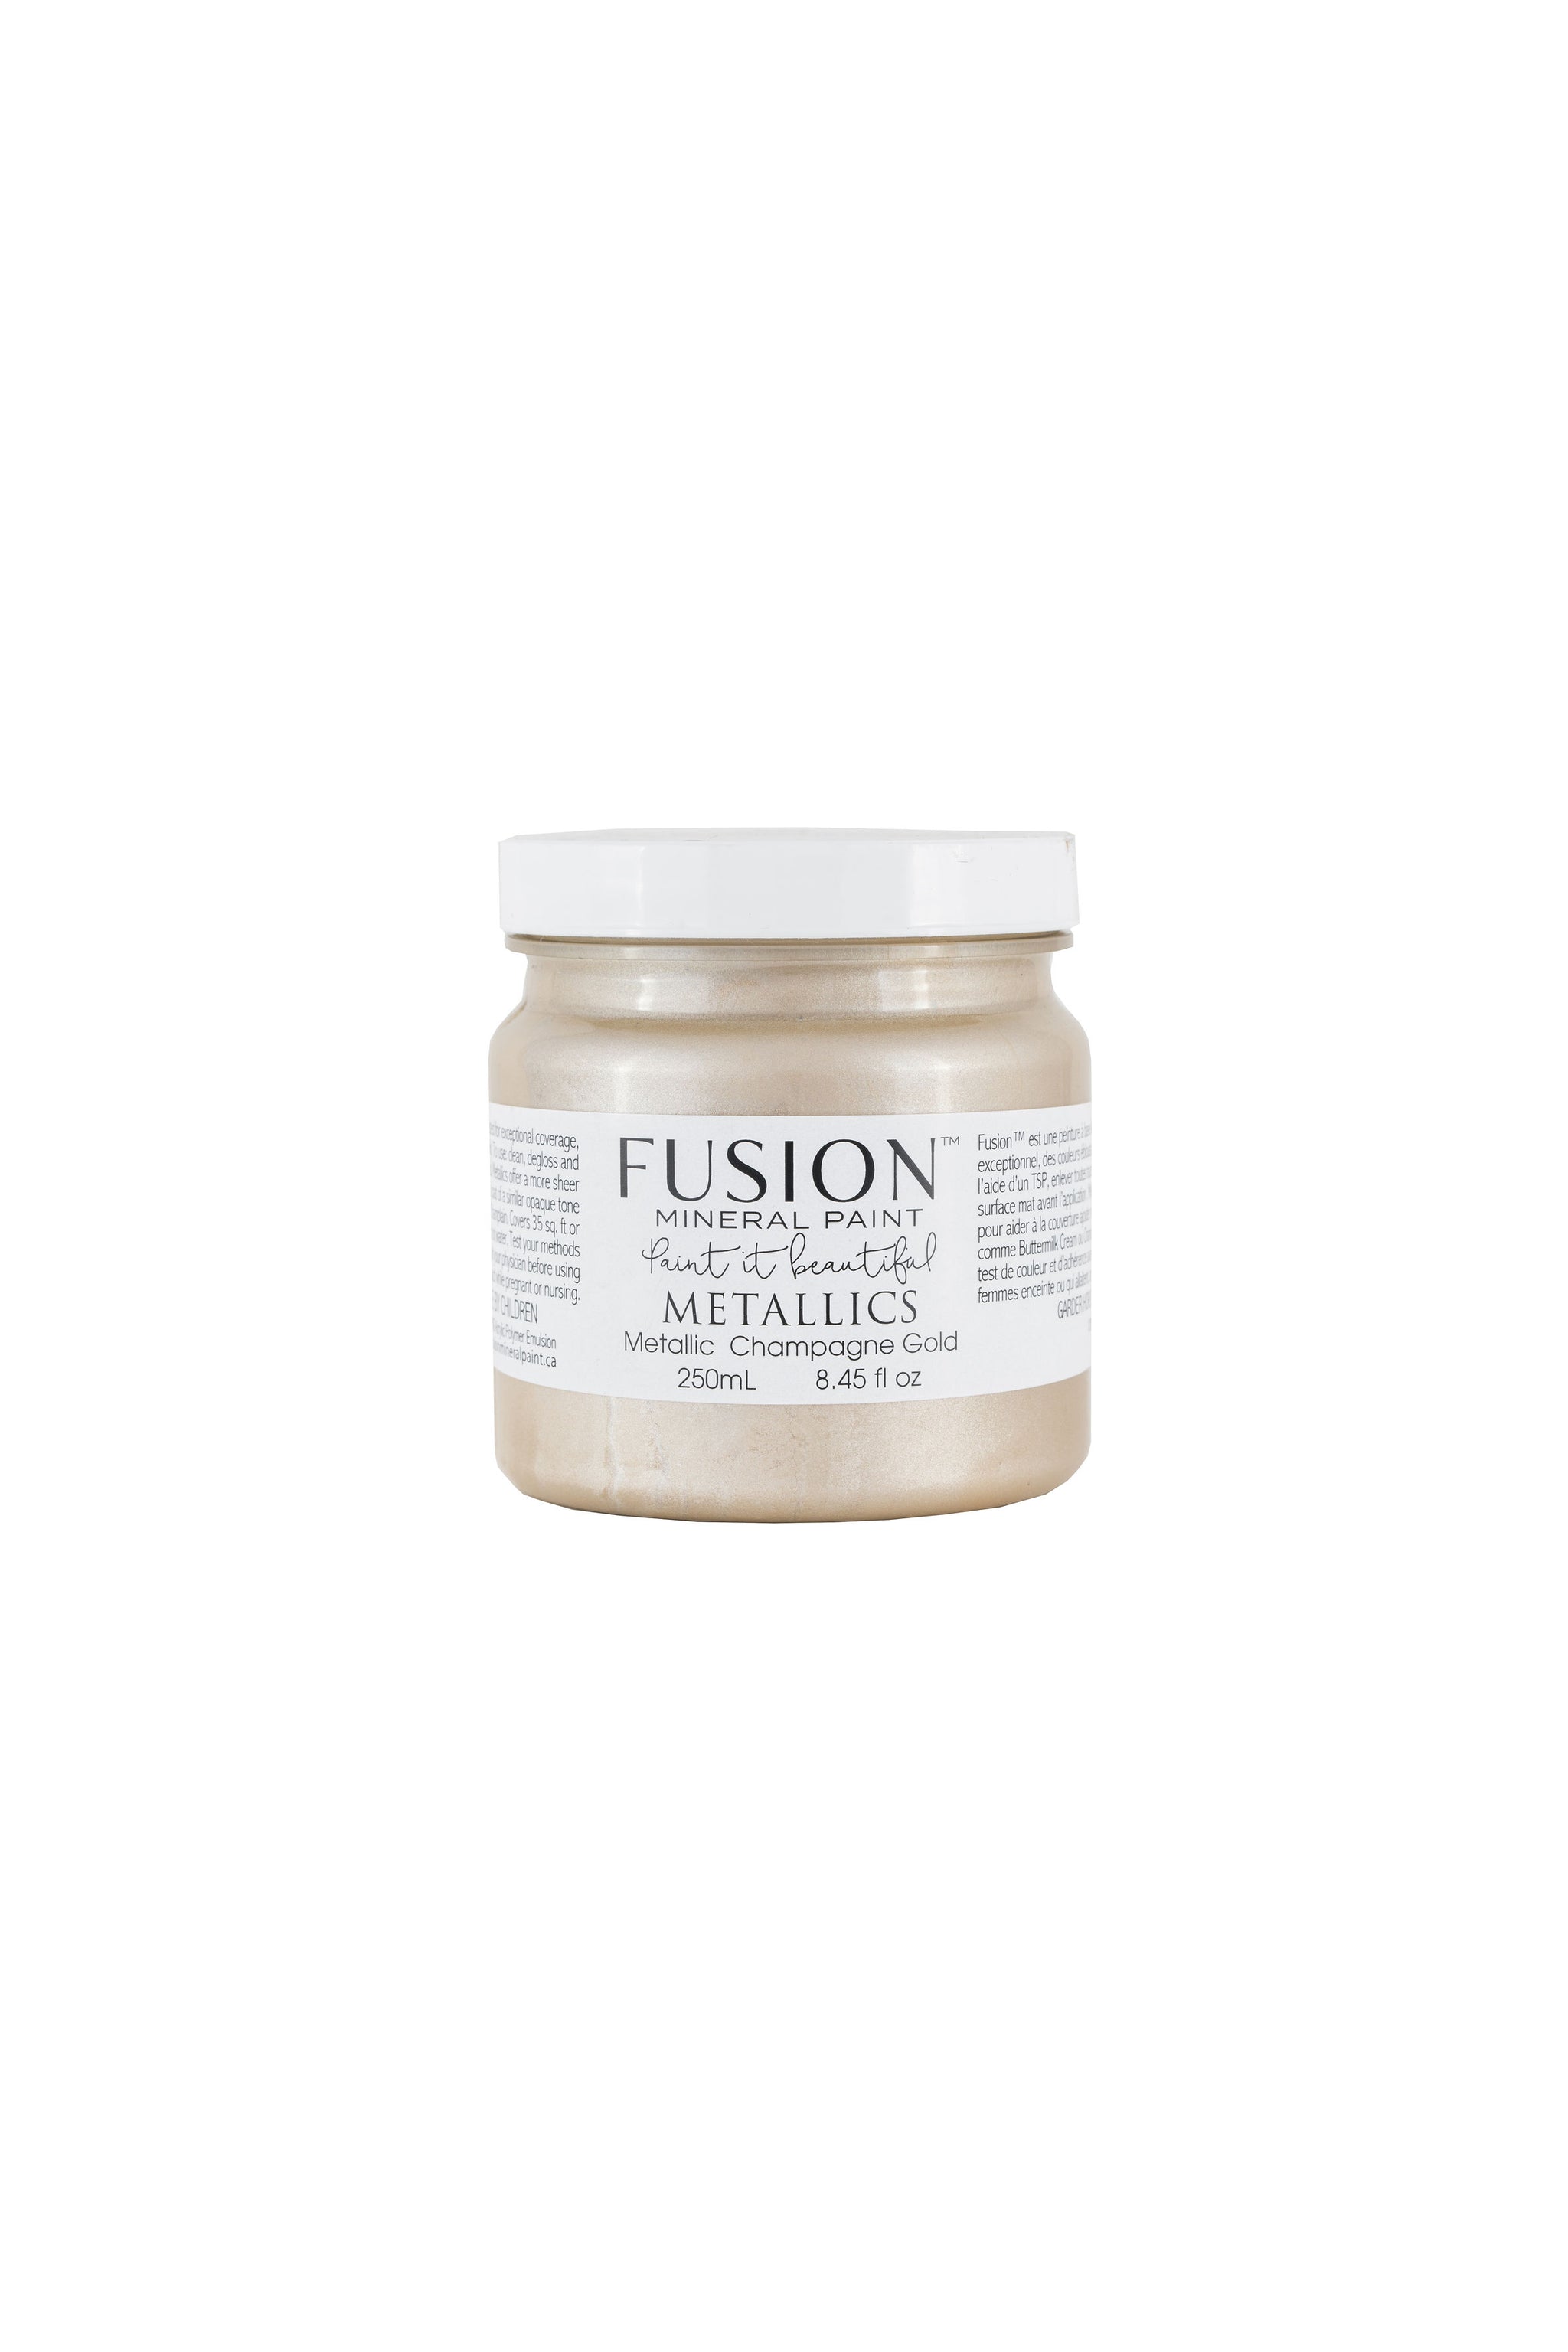 Fusion Mineral Paint Metallic Champagne Gold